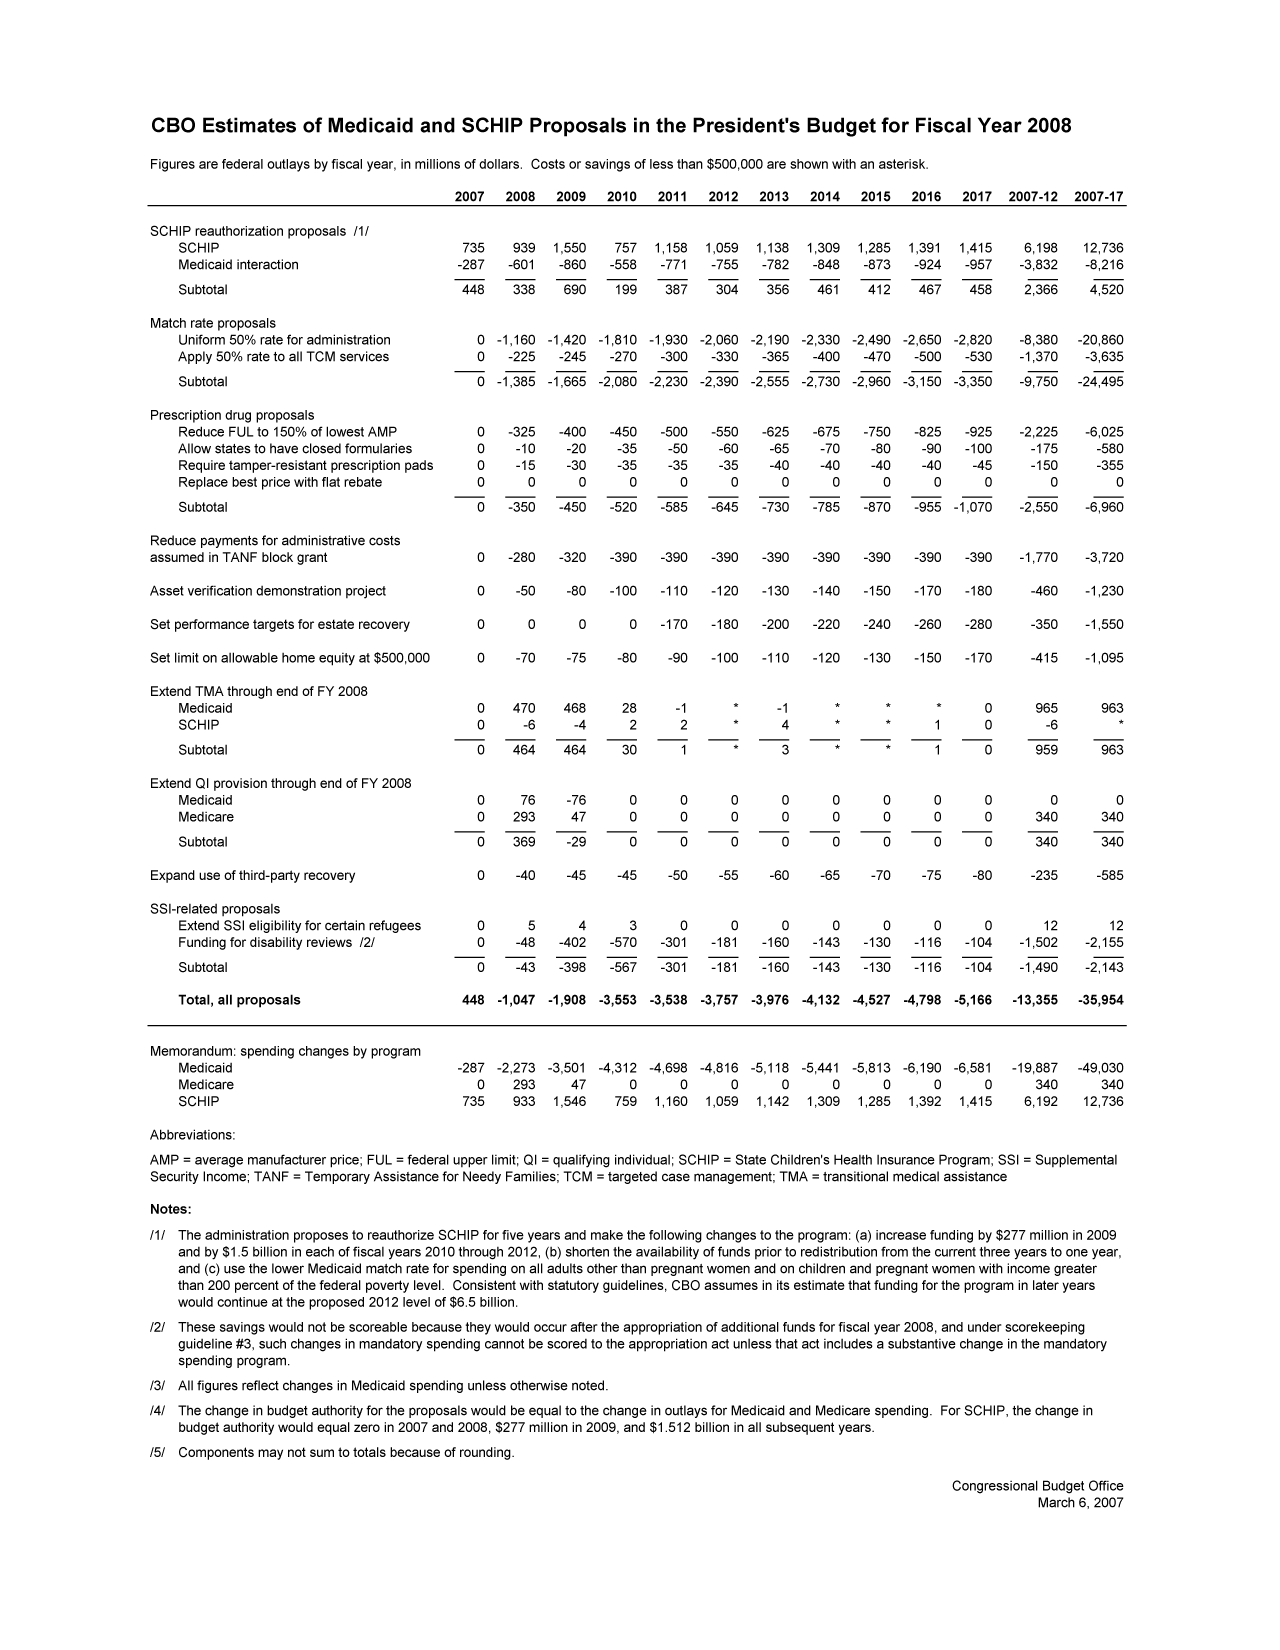 handle is hein.congrec/cbo9295 and id is 1 raw text is: CBO Estimates of Medicaid and SCHIP Proposals in the President's Budget for Fiscal Year 2008
Figures are federal outlays by fiscal year, in millions of dollars. Costs or savings of less than $500,000 are shown with an asterisk.
2007    2008    2009    2010   2011    2012    2013    2014    2015   2016    2017   2007-12   2007-17

SCHIP reauthorization proposals Ill
SCHIP
Medicaid interaction
Subtotal
Match rate proposals
Uniform 50% rate for administration
Apply 50% rate to all TCM services
Subtotal
Prescription drug proposals
Reduce FUL to 150% of lowest AMP
Allow states to have closed formularies
Require tamper-resistant prescription pads
Replace best price with flat rebate
Subtotal
Reduce payments for administrative costs
assumed in TANF block grant
Asset verification demonstration project
Set performance targets for estate recovery
Set limit on allowable home equity at $500,000
Extend TMA through end of FY 2008
Medicaid
SCHIP
Subtotal
Extend QI provision through end of FY 2008
Medicaid
Medicare
Subtotal
Expand use of third-party recovery
SSI-related proposals
Extend SSI eligibility for certain refugees
Funding for disability reviews /2/
Subtotal
Total, all proposals

735    939  1,550   757   1,158  1,059  1,138  1,309  1,285  1,391  1,415
-287   -601   -860  -558   -771   -755   -782  -848   -873   -924   -957
448    338    690   199    387    304    356   461    412    467    458
0 -1,160 -1,420 -1,810 -1,930 -2,060 -2,190 -2,330 -2,490 -2,650 -2,820
0   -225   -245   -270  -300   -330   -365   -400   -470  -500   -530
0 -1,385 -1,665 -2,080 -2,230 -2,390 -2,555 -2,730 -2,960 -3,150 -3,350
0   -325   -400   -450  -500   -550   -625   -675   -750  -825   -925
0    -10    -20    -35   -50    -60    -65    -70    -80   -90   -100
0    -15    -30    -35   -35    -35    -40    -40    -40   -40    -45
0      0      0     0      0      0      0     0      0      0      0
0   -350   -450   -520  -585   -645   -730   -785   -870  -955 -1,070
0   -280   -320   -390  -390   -390   -390   -390   -390  -390   -390
0    -50    -80   -100  -110   -120   -130   -140   -150  -170   -180
0      0      0     0   -170   -180   -200   -220   -240  -260   -280
0    -70    -75    -80    -90  -100   -110   -120   -130  -150   -170
0    470    468    28      -1           -1                          0
0     -6     -4     2      2             4                   1      0
0    464    464    30      1             3                   1      0
0     76    -76     0      0      0      0     0      0      0      0
0    293     47     0      0      0      0     0      0      0      0
0    369    -29     0      0      0      0     0      0      0      0
0    -40    -45    -45    -50   -55    -60    -65    -70   -75    -80
0      5      4     3      0      0      0     0      0      0      0
0    -48   -402   -570  -301   -181   -160   -143   -130  -116   -104
0    -43   -398   -567  -301   -181   -160   -143   -130  -116   -104

448 -1,047 -1,908 -3,553 -3,538 -3,757 -3,976 -4,132 -4,527 -4,798 -5,166 -13,355 -35,954

Memorandum: spending changes by program
Medicaid
Medicare
SCHIP

-287 -2,273 -3,501 -4,312 -4,698 -4,816 -5,118 -5,441 -5,813 -6,190 -6,581  -19,887  -49,030
0    293    47      0     0      0     0      0     0      0     0      340     340
735    933  1,546   759  1,160  1,059  1,142  1,309  1,285  1,392  1,415  6,192  12,736

Abbreviations:
AMP = average manufacturer price; FUL = federal upper limit; QI = qualifying individual; SCHIP = State Children's Health Insurance Program; SSI = Supplemental
Security Income; TANF = Temporary Assistance for Needy Families; TCM = targeted case management; TMA = transitional medical assistance
Notes:
/l/ The administration proposes to reauthorize SCHIP for five years and make the following changes to the program: (a) increase funding by $277 million in 2009
and by $1.5 billion in each of fiscal years 2010 through 2012, (b) shorten the availability of funds prior to redistribution from the current three years to one year,
and (c) use the lower Medicaid match rate for spending on all adults other than pregnant women and on children and pregnant women with income greater
than 200 percent of the federal poverty level. Consistent with statutory guidelines, CBO assumes in its estimate that funding for the program in later years
would continue at the proposed 2012 level of $6.5 billion.
/2/ These savings would not be scoreable because they would occur after the appropriation of additional funds for fiscal year 2008, and under scorekeeping
guideline #3, such changes in mandatory spending cannot be scored to the appropriation act unless that act includes a substantive change in the mandatory
spending program.
/3/ All figures reflect changes in Medicaid spending unless otherwise noted.
/4/ The change in budget authority for the proposals would be equal to the change in outlays for Medicaid and Medicare spending. For SCHIP, the change in
budget authority would equal zero in 2007 and 2008, $277 million in 2009, and $1.512 billion in all subsequent years.
/5/ Components may not sum to totals because of rounding.

Congressional Budget Office
March 6, 2007

6,198   12,736
-3,832  -8,216
2,366   4,520
-8,380  -20,860
-1,370  -3,635
-9,750  -24,495

-2,225
-175
-150
0
-2.550

-6,025
-580
-355
0
-6.960

-1,770  -3,720
-460   -1,230
-350   -1,550
-415   -1,095

965
-6
959
0
340
340

963
963
0
340
340

-235     -585
12       12
-1,502   -2,155
-1,490   -2,143


